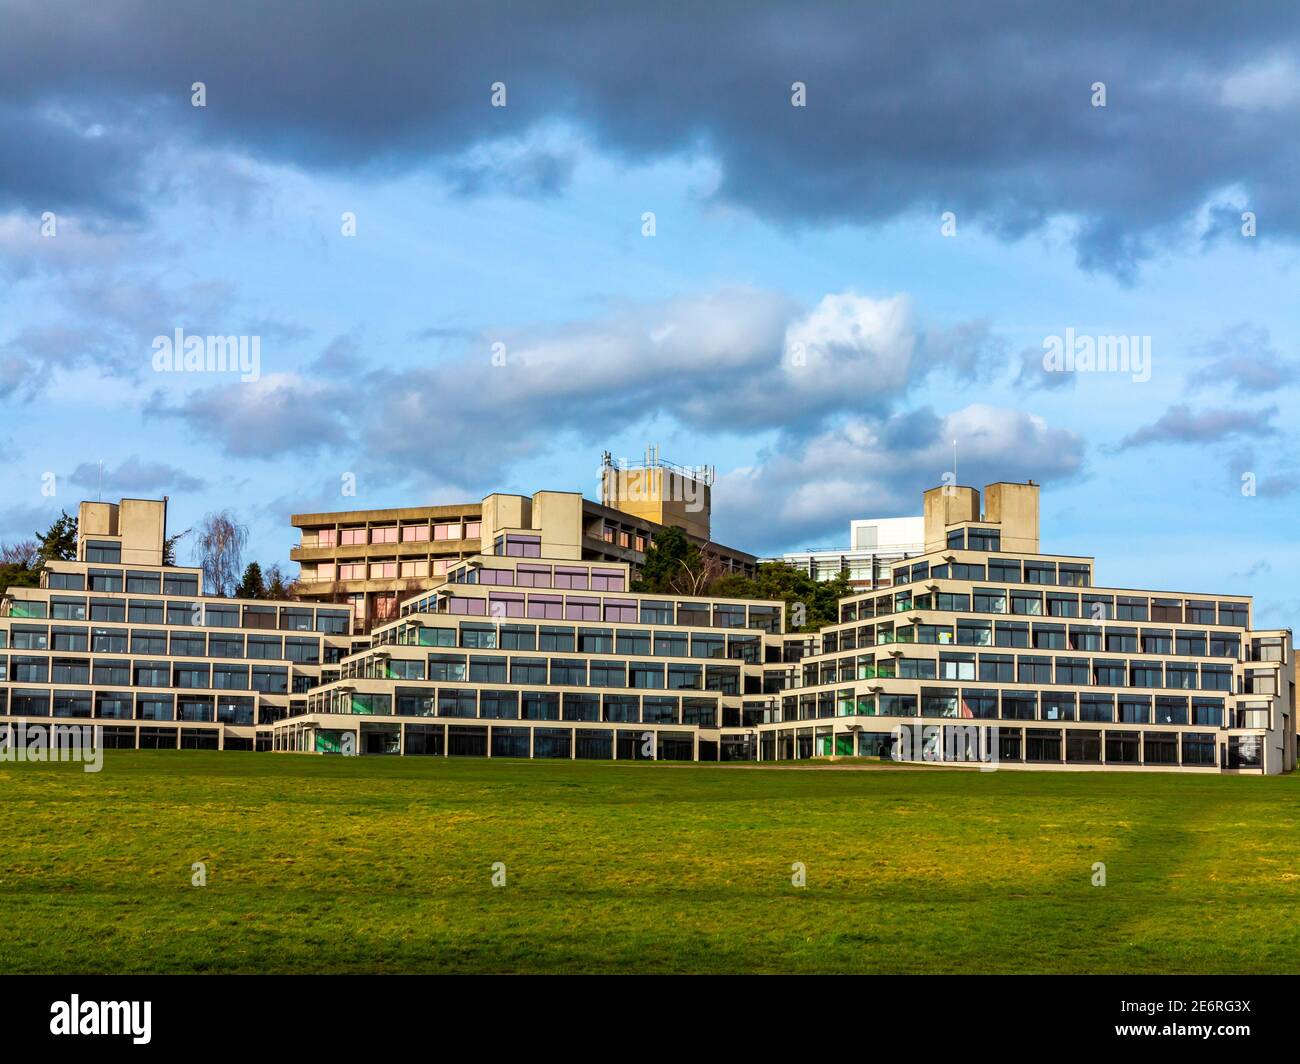 The University of East Anglia campus in Norwich England UK designed by Denys Lasdun and built from 1962 to 1968 with ziggurat style concrete terraces. Stock Photo